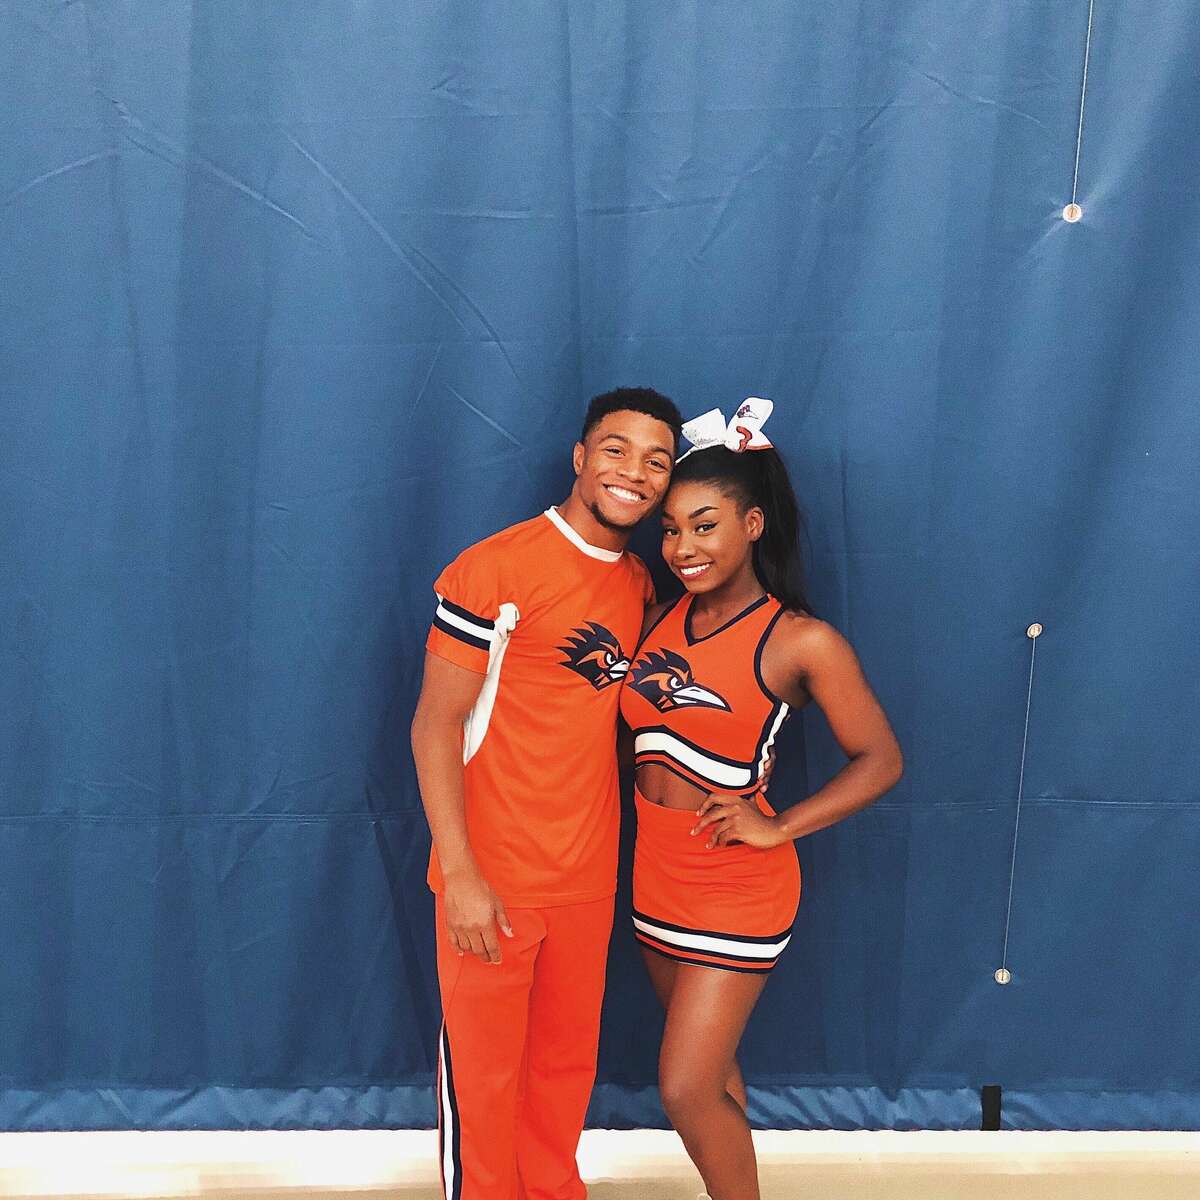 The 'super human' UTSA cheerleader who completed a 100-yard tumbling pass  Tyriq Kuykendall, left, is seen in the photo with one of his teammates. In November, the University of Texas-San Antonio Cheerleader tumbled his way 100 yards in a video that has become viral. Read more here.